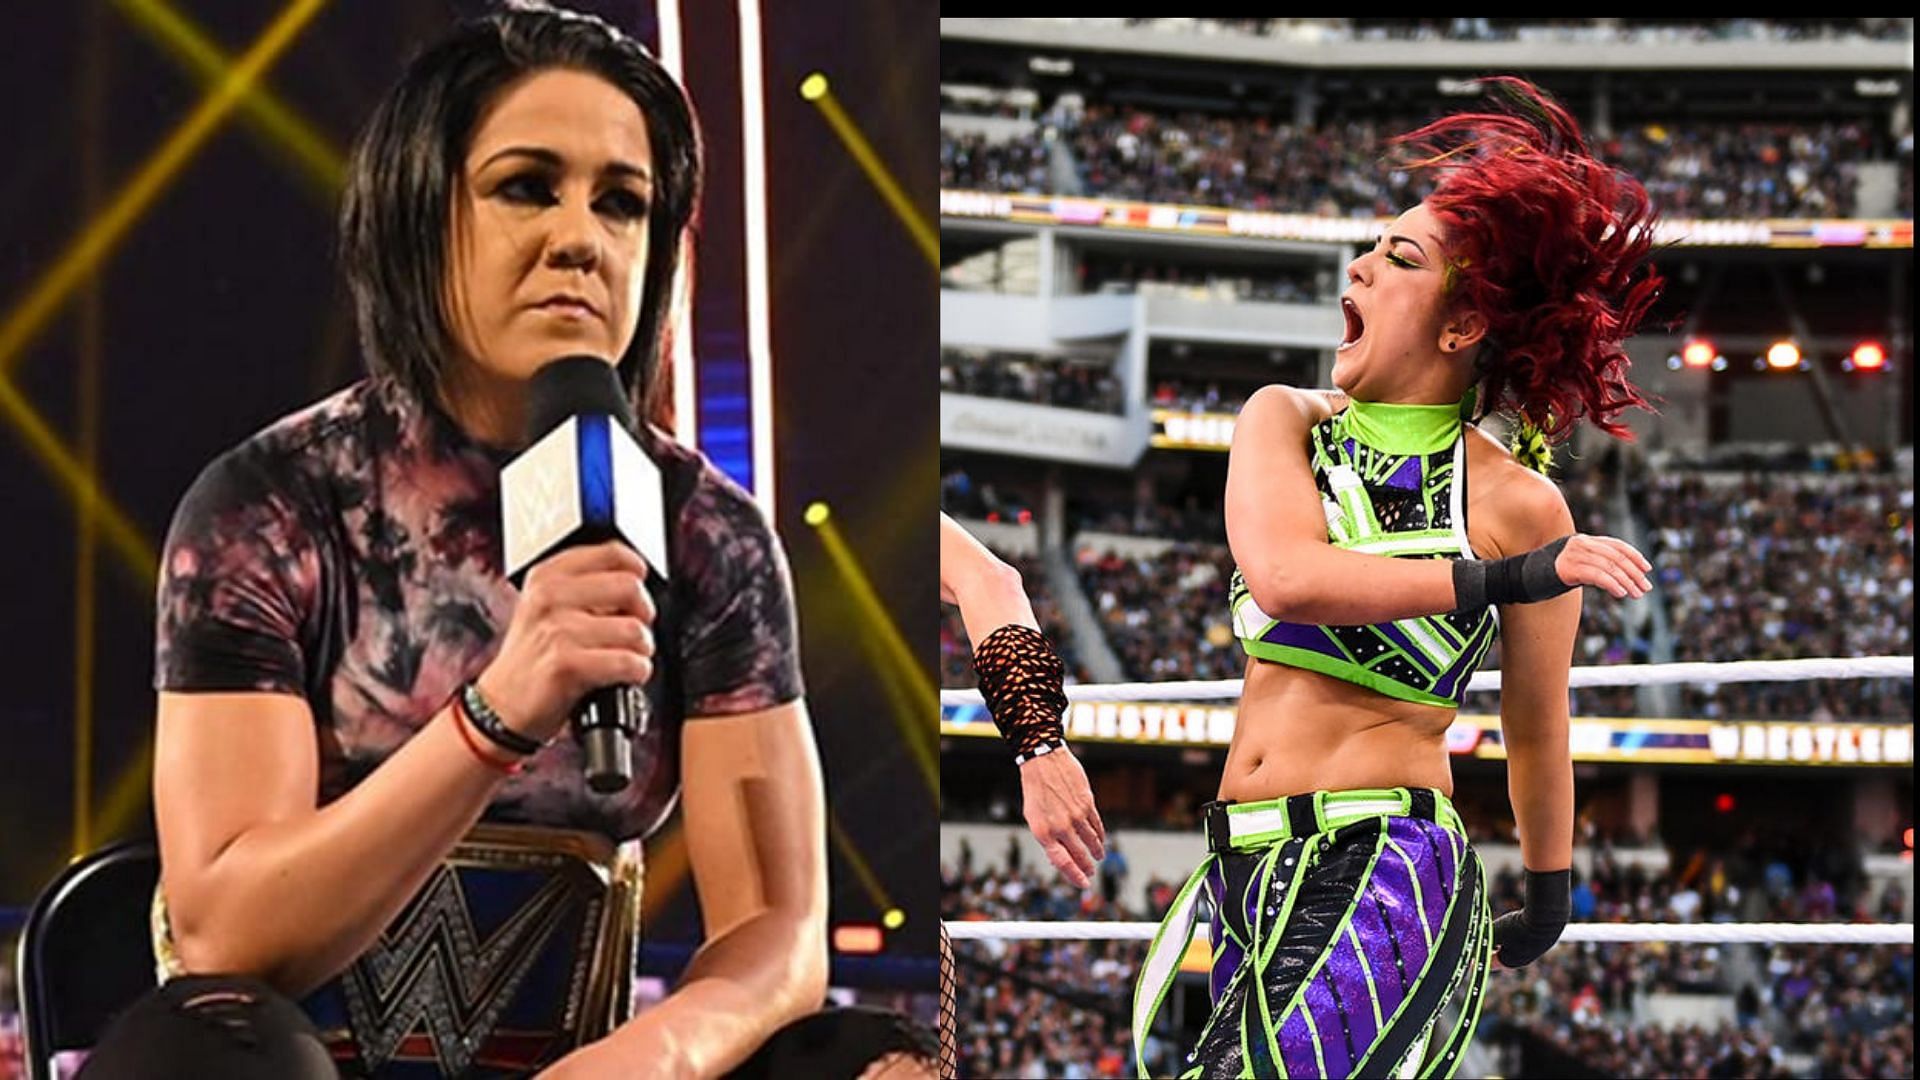 Is Bayley done with her current character after WrestleMania?